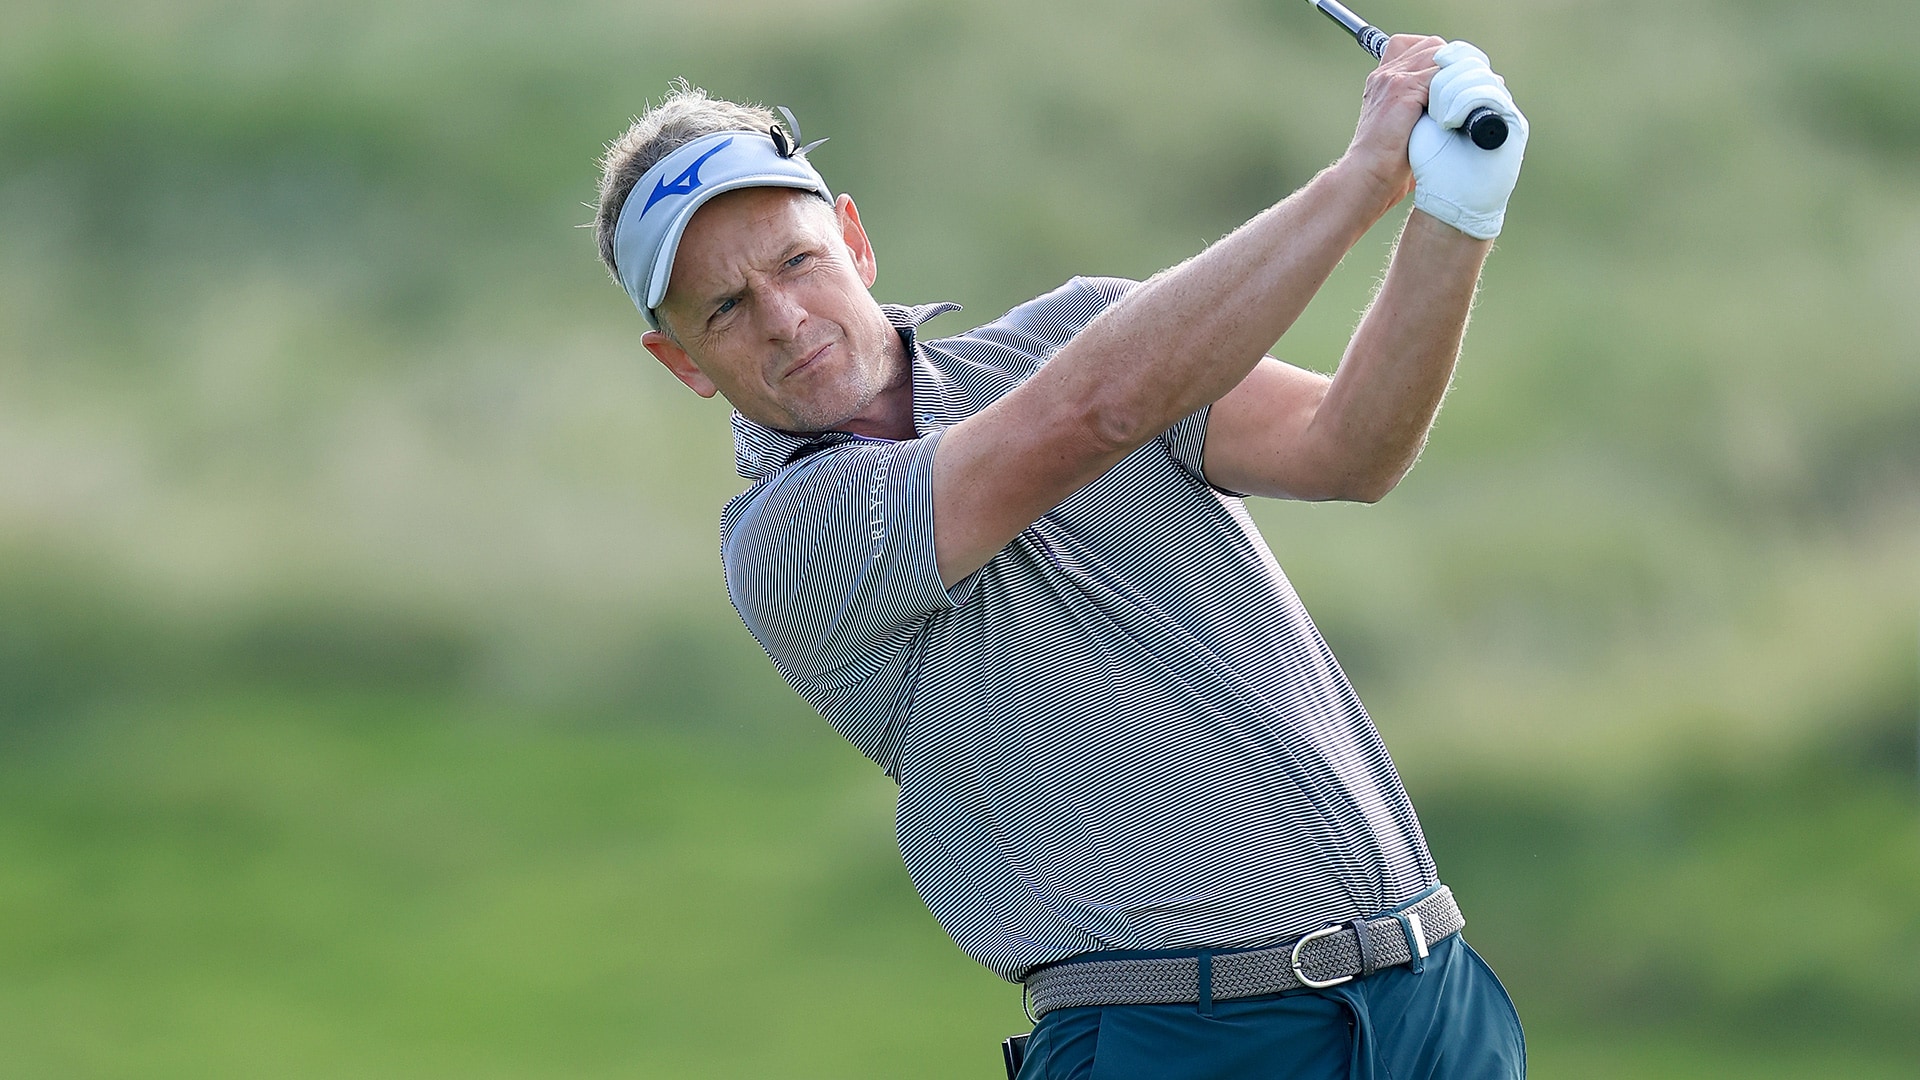 Ryder Cup captain Luke Donald fires 64 to grab lead at Abu Dhabi HSBC Champ.